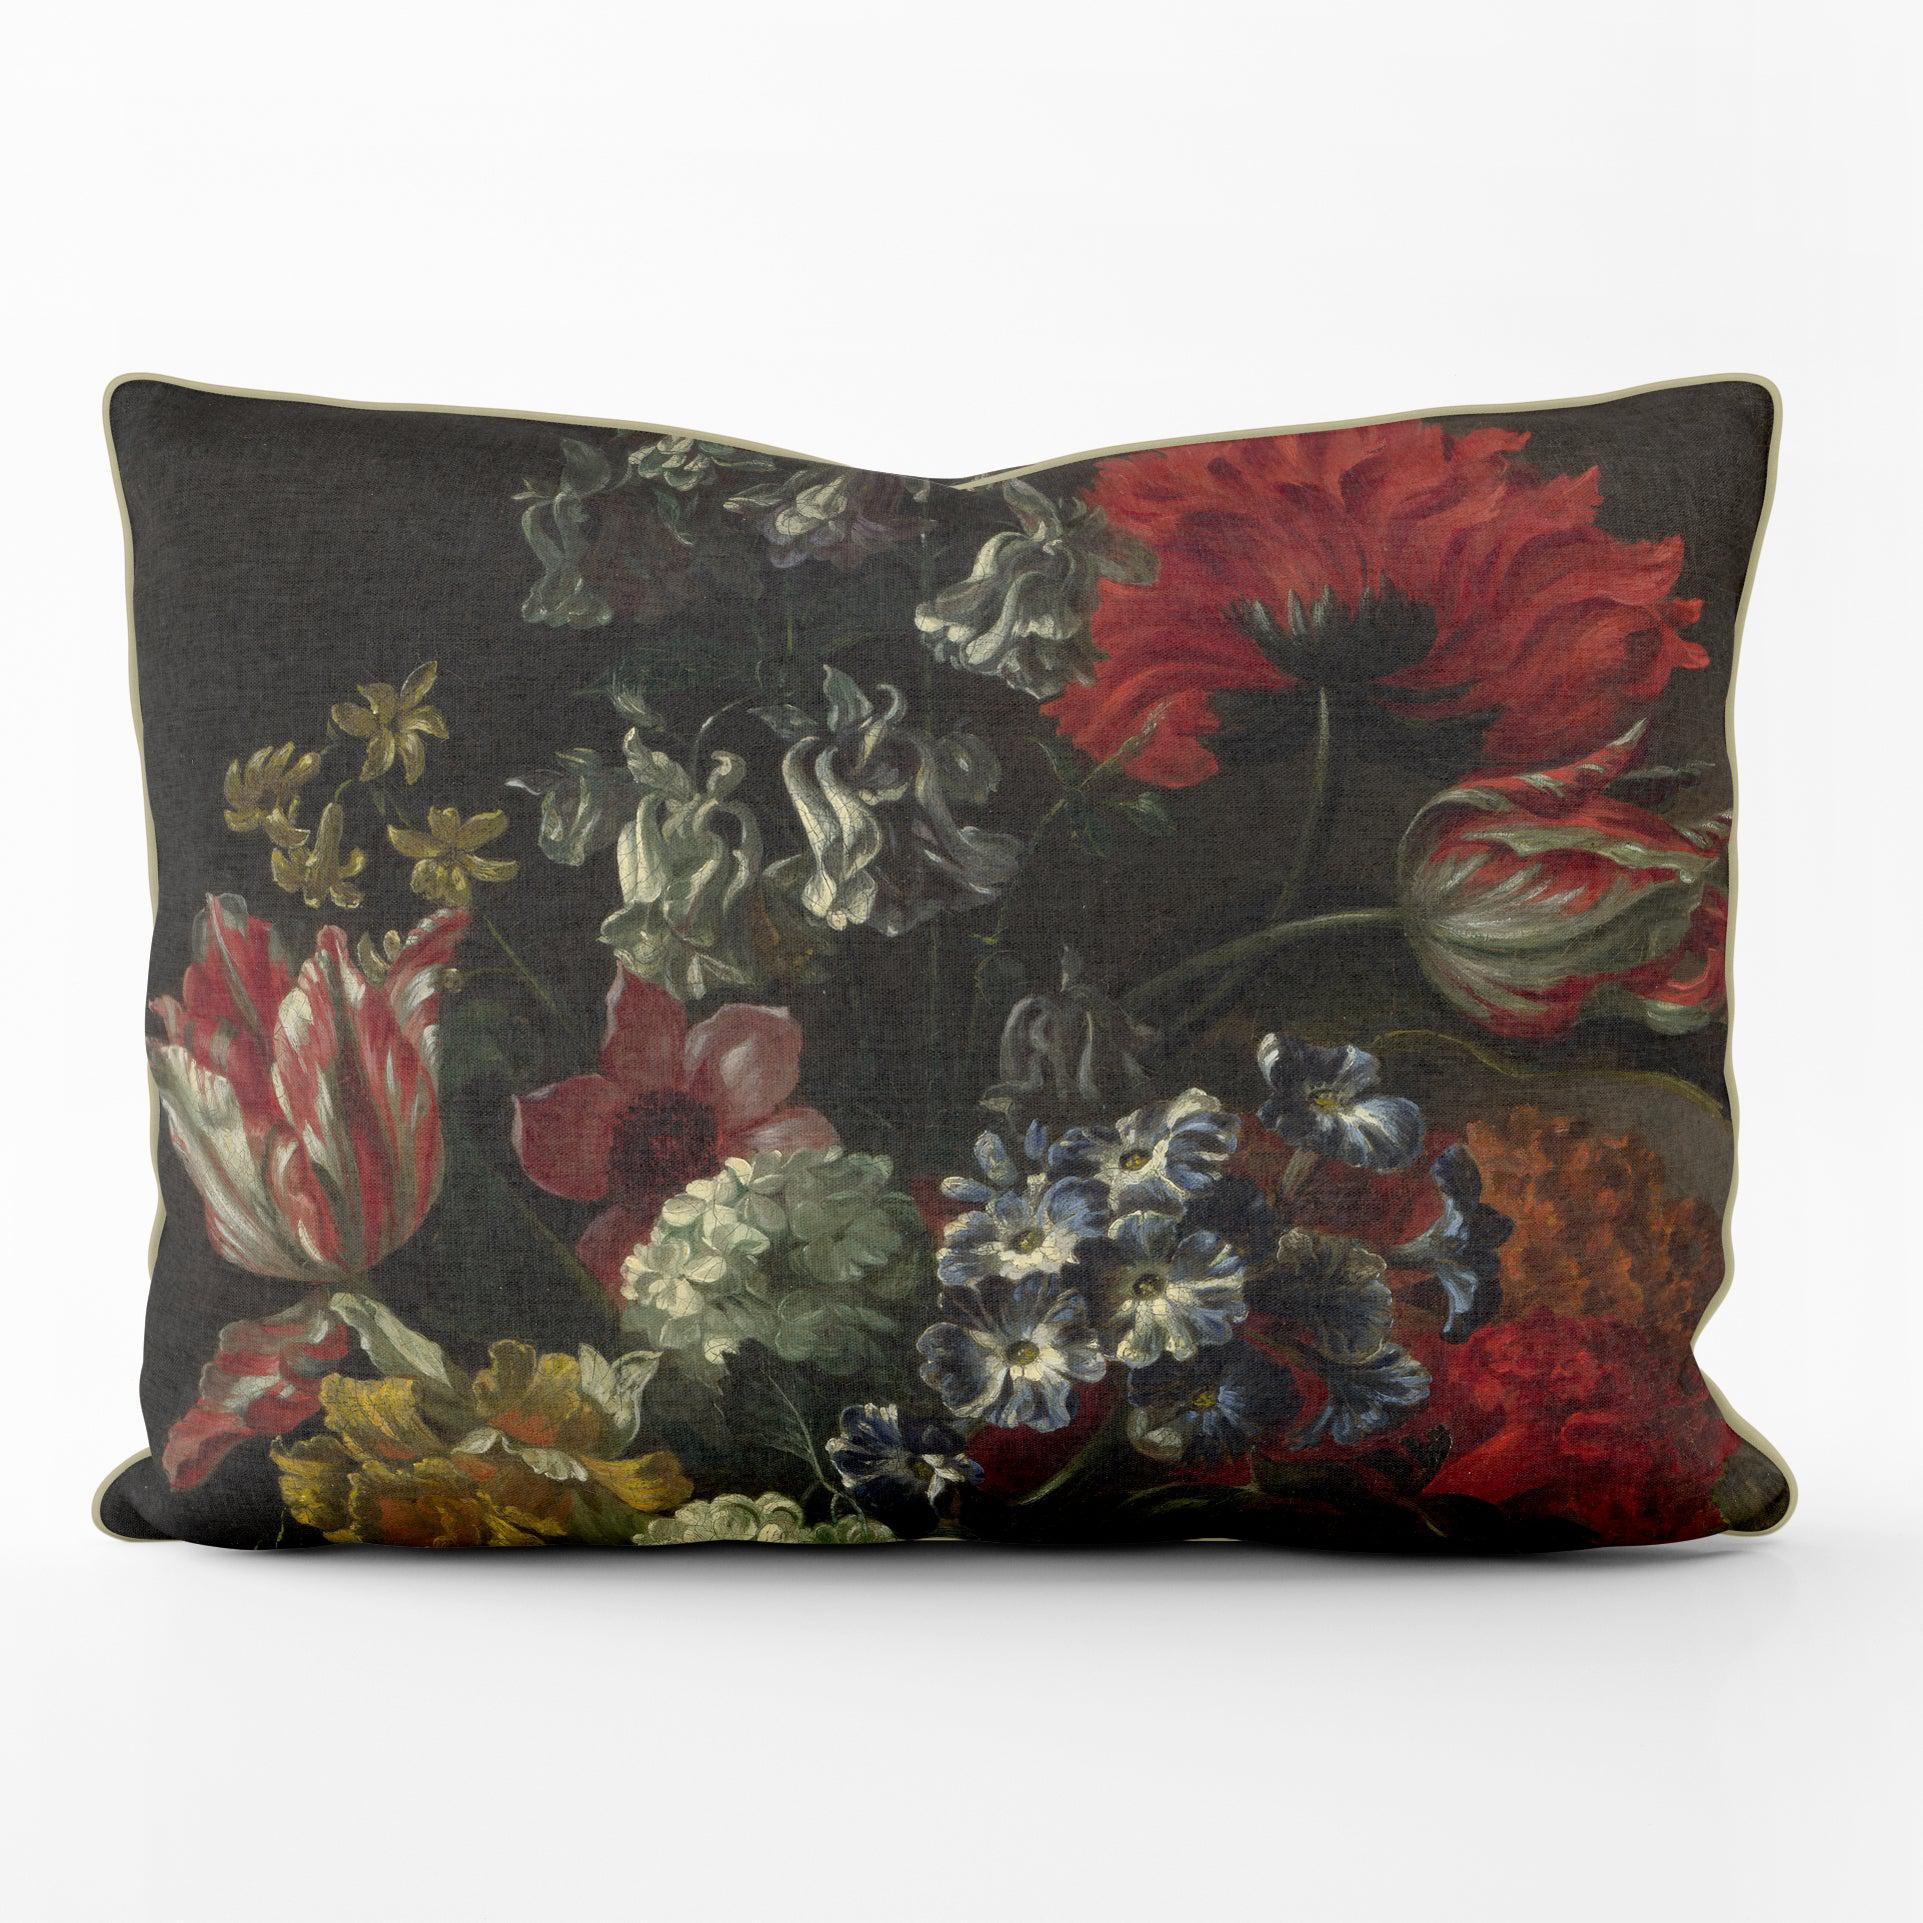 Bowl Of Flowers - Marie Blancour - National Gallery LUXE Cushion - Handmade Cushions UK - WeLoveCushions